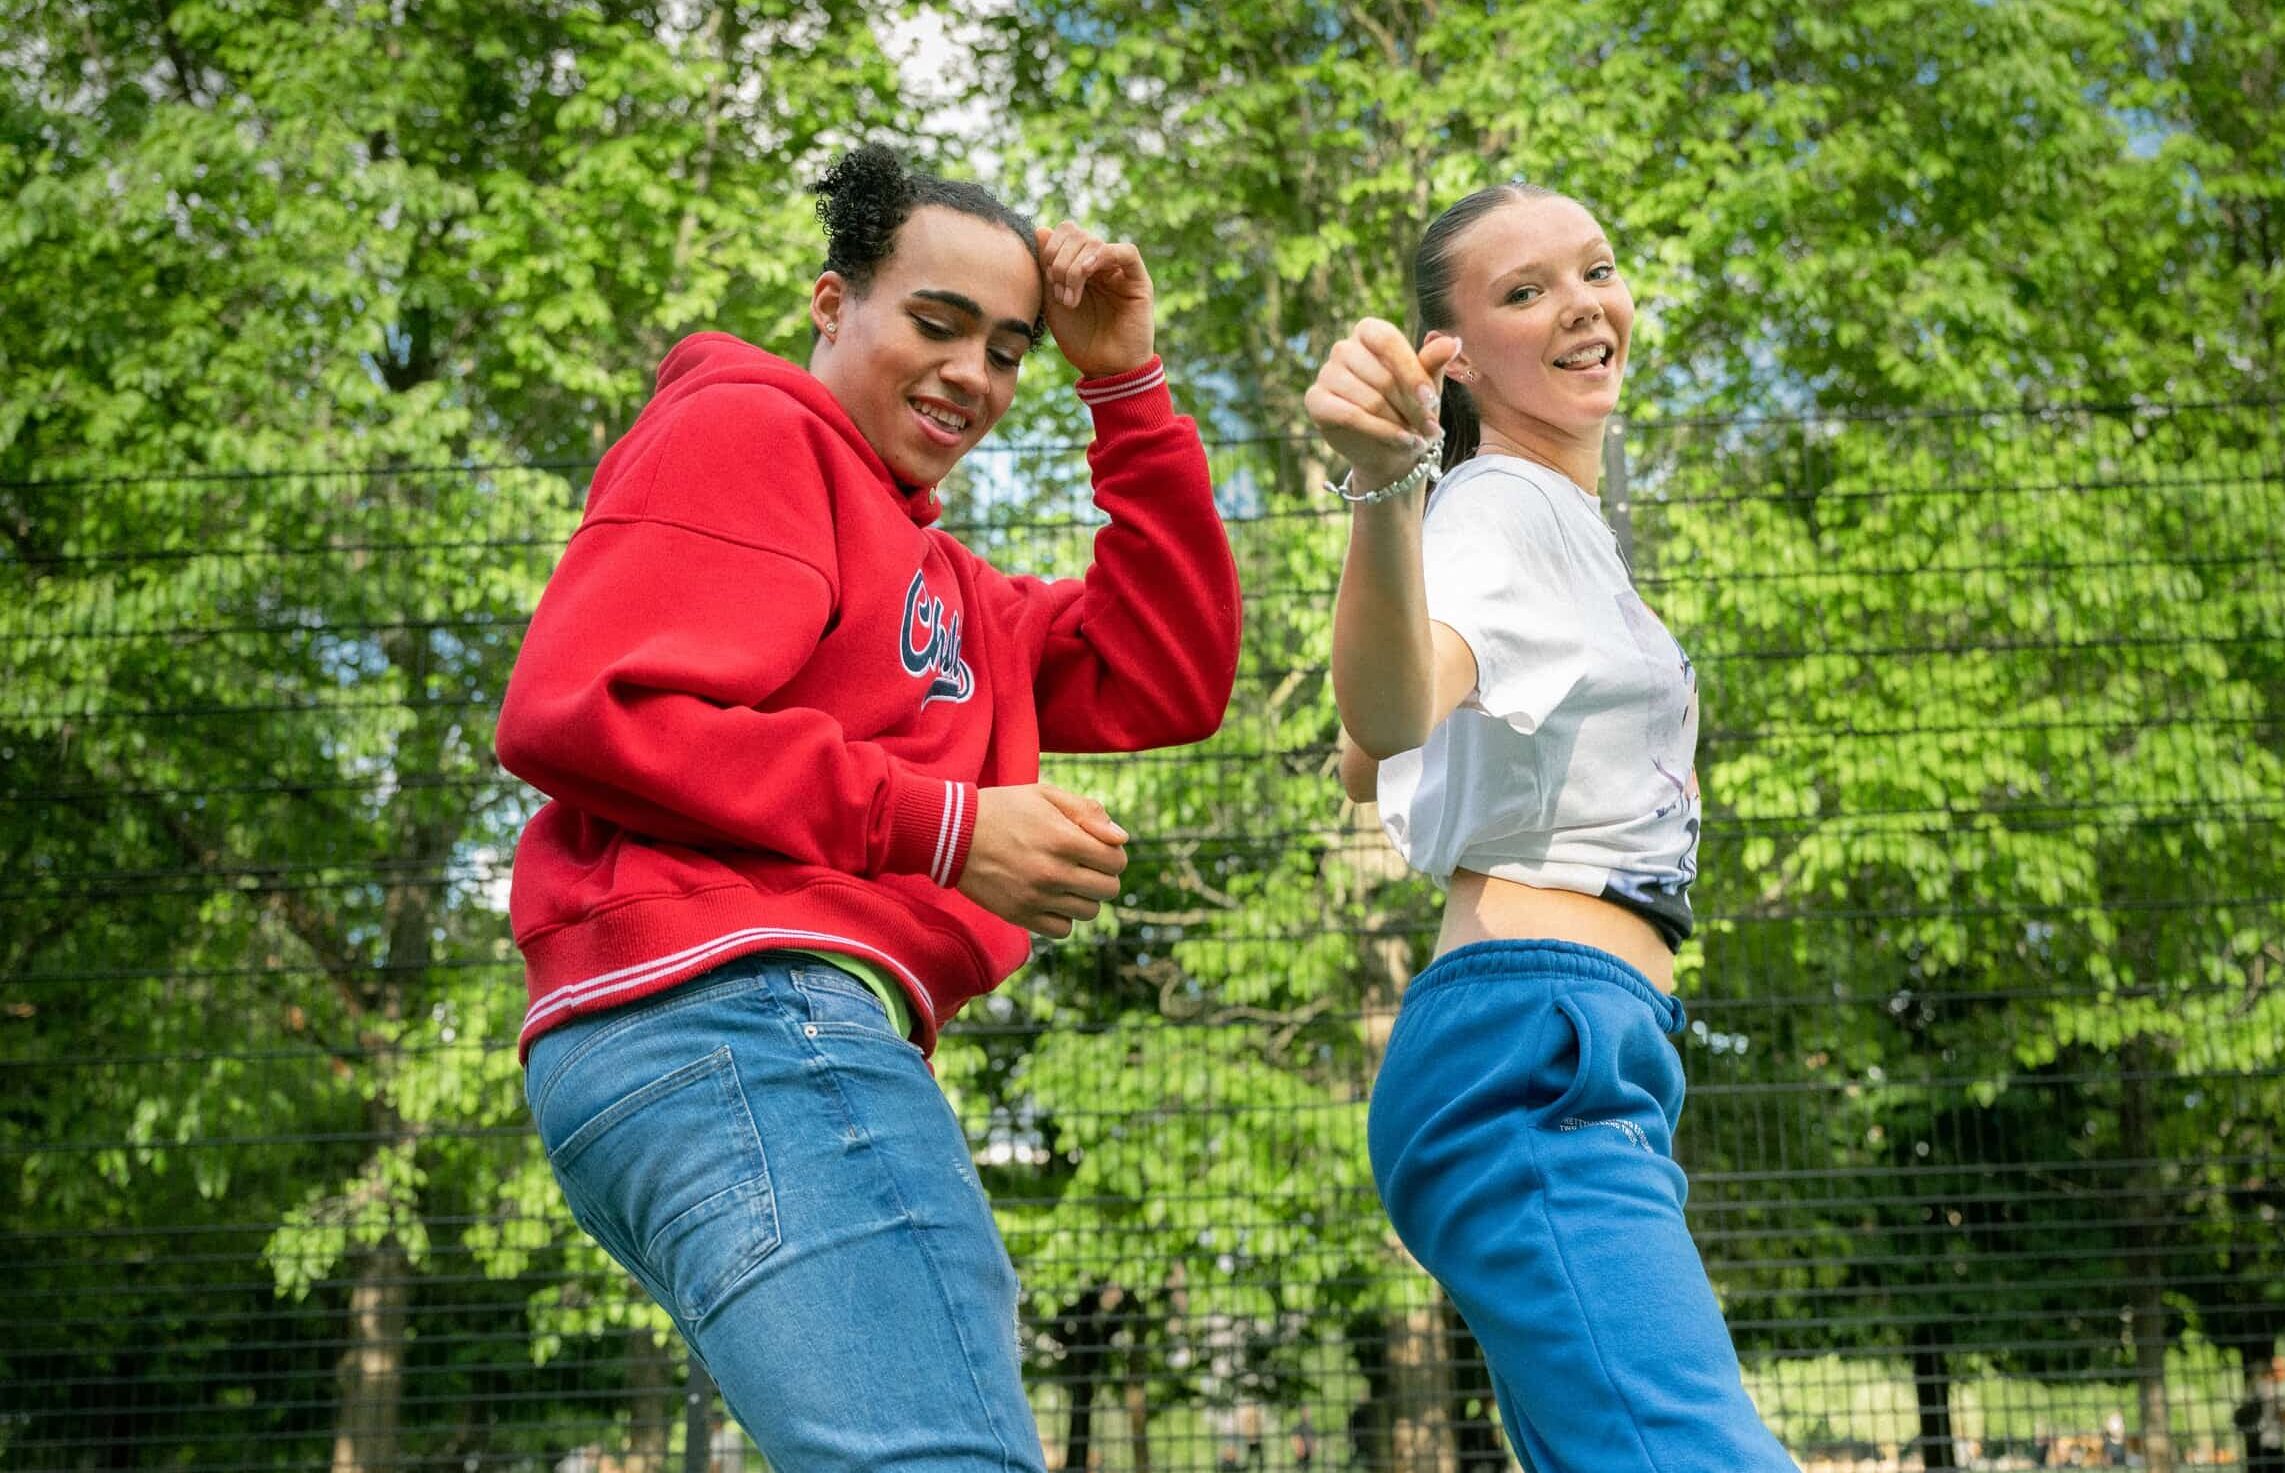 Dancers in South London